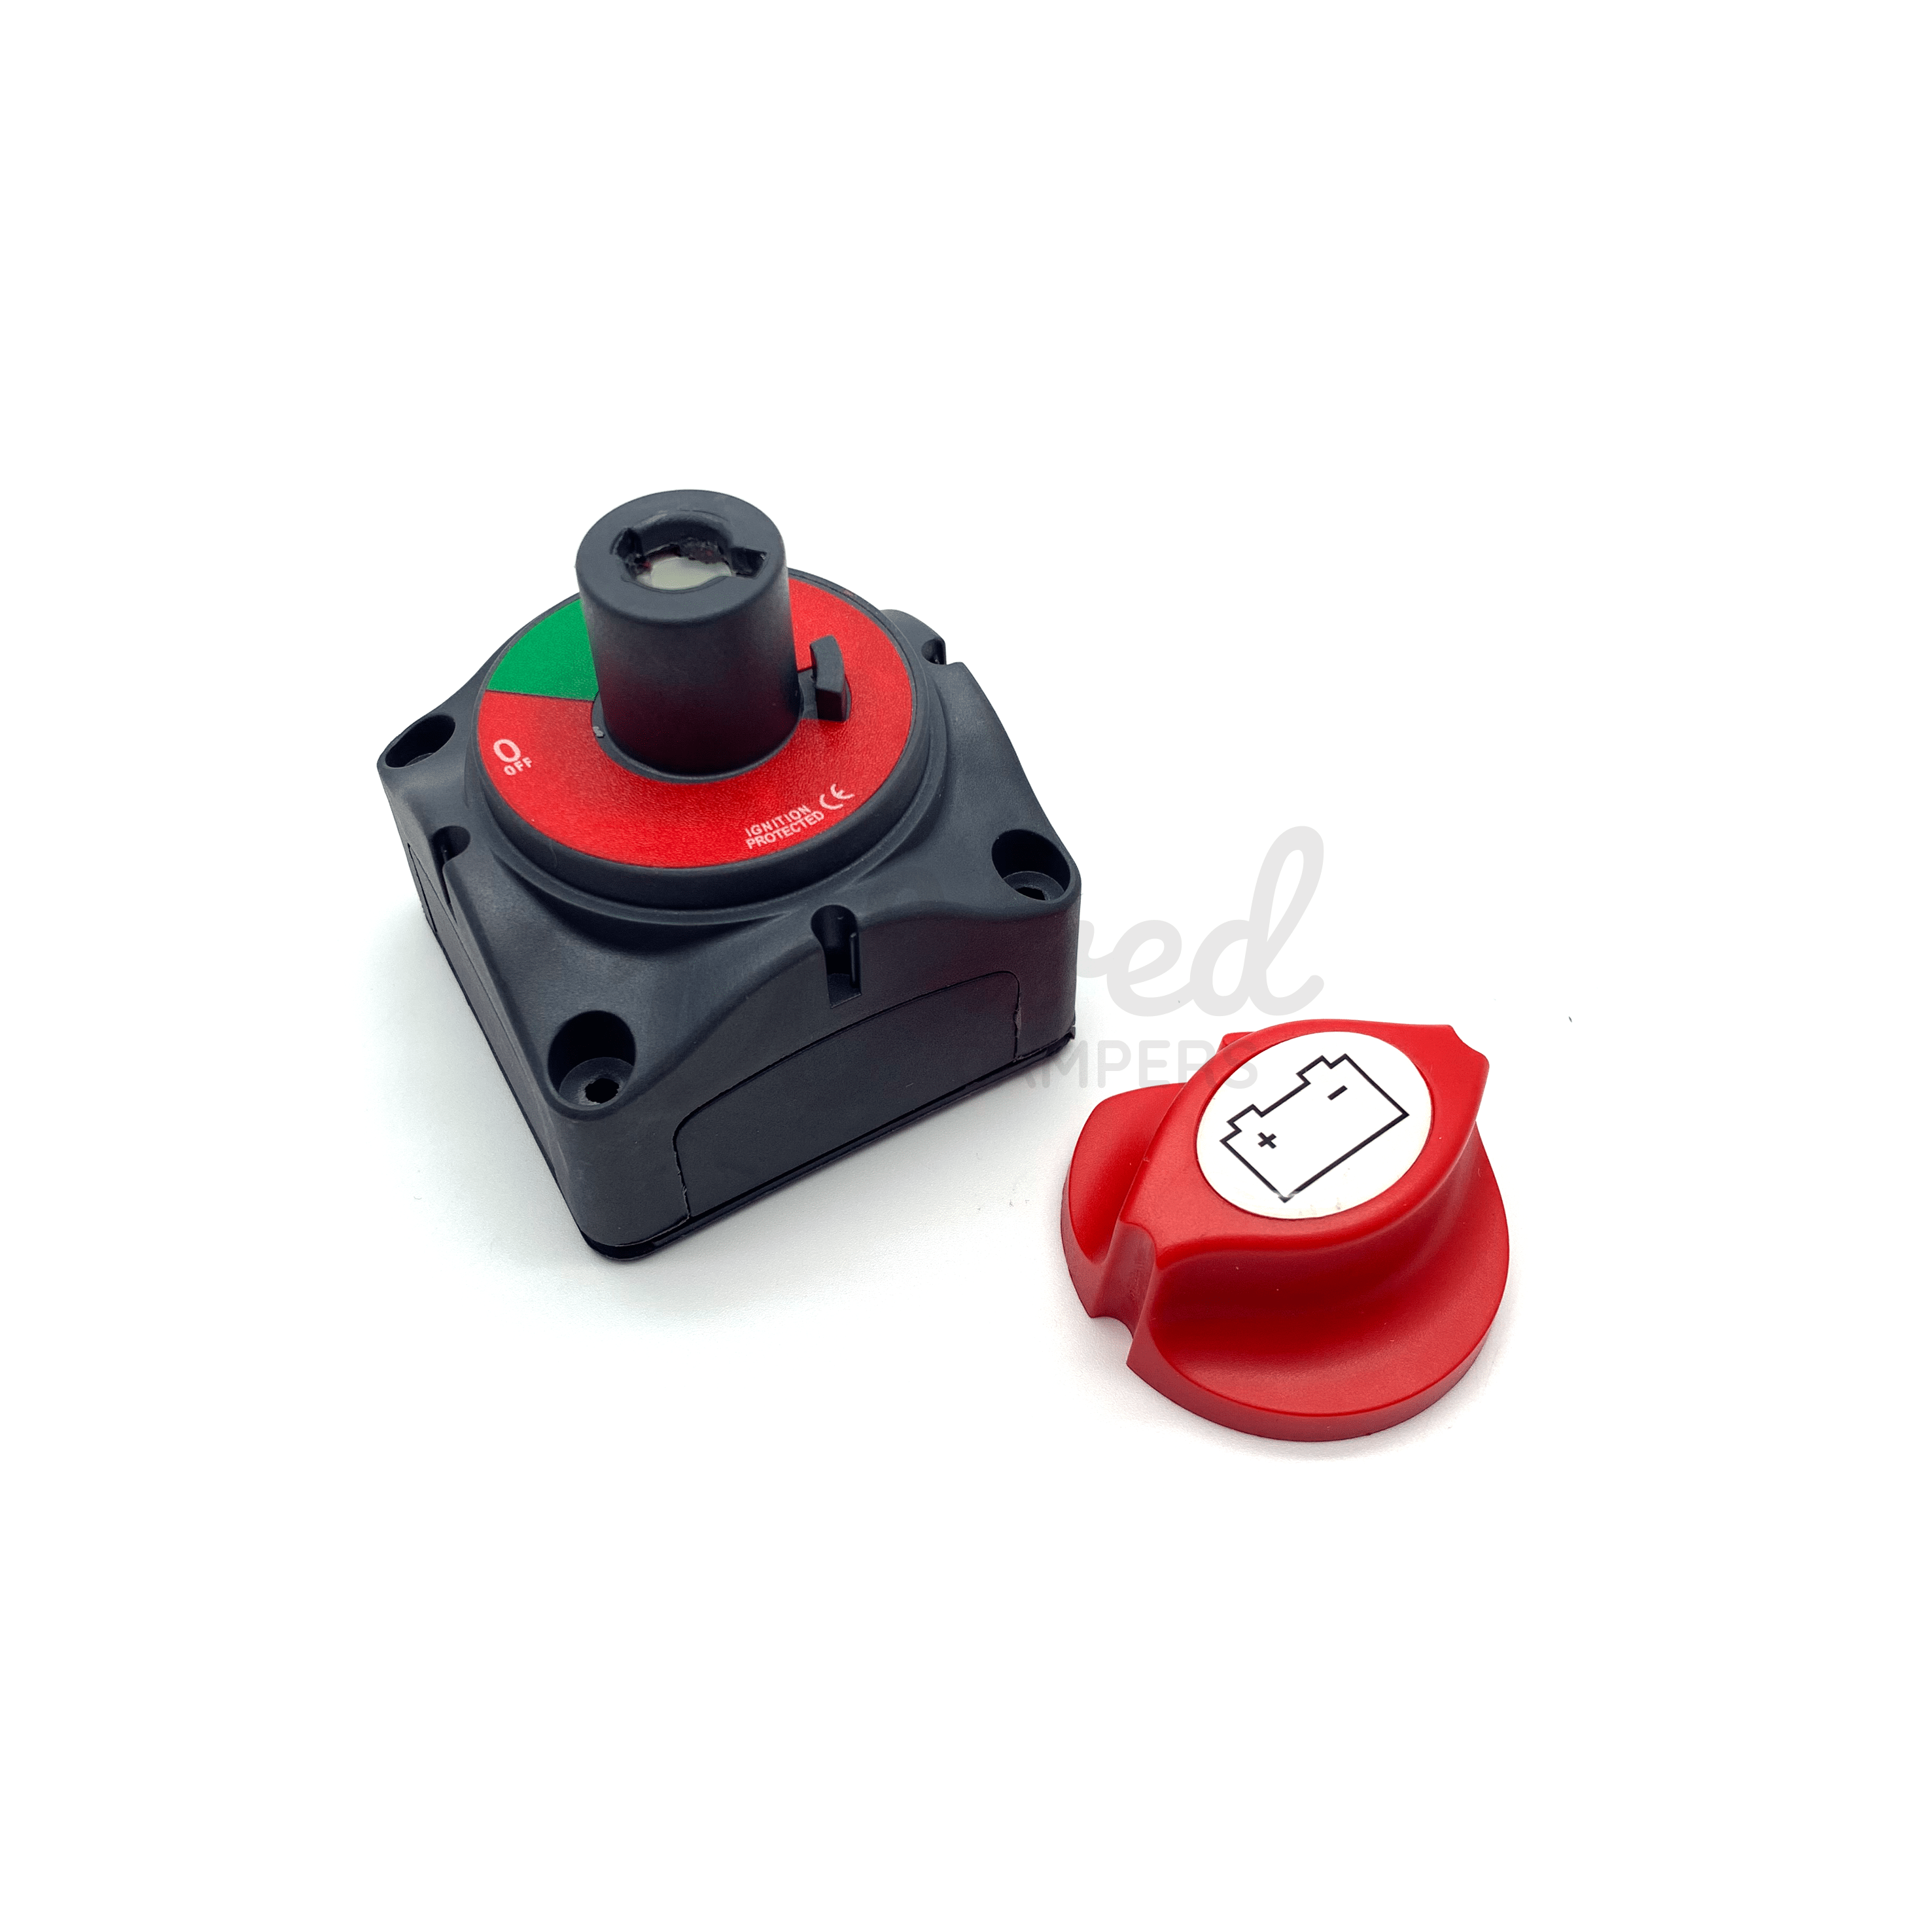 Wired Campers Limited Removable Key Medium Duty 12V 200A Battery Power Isolator Kill Switch